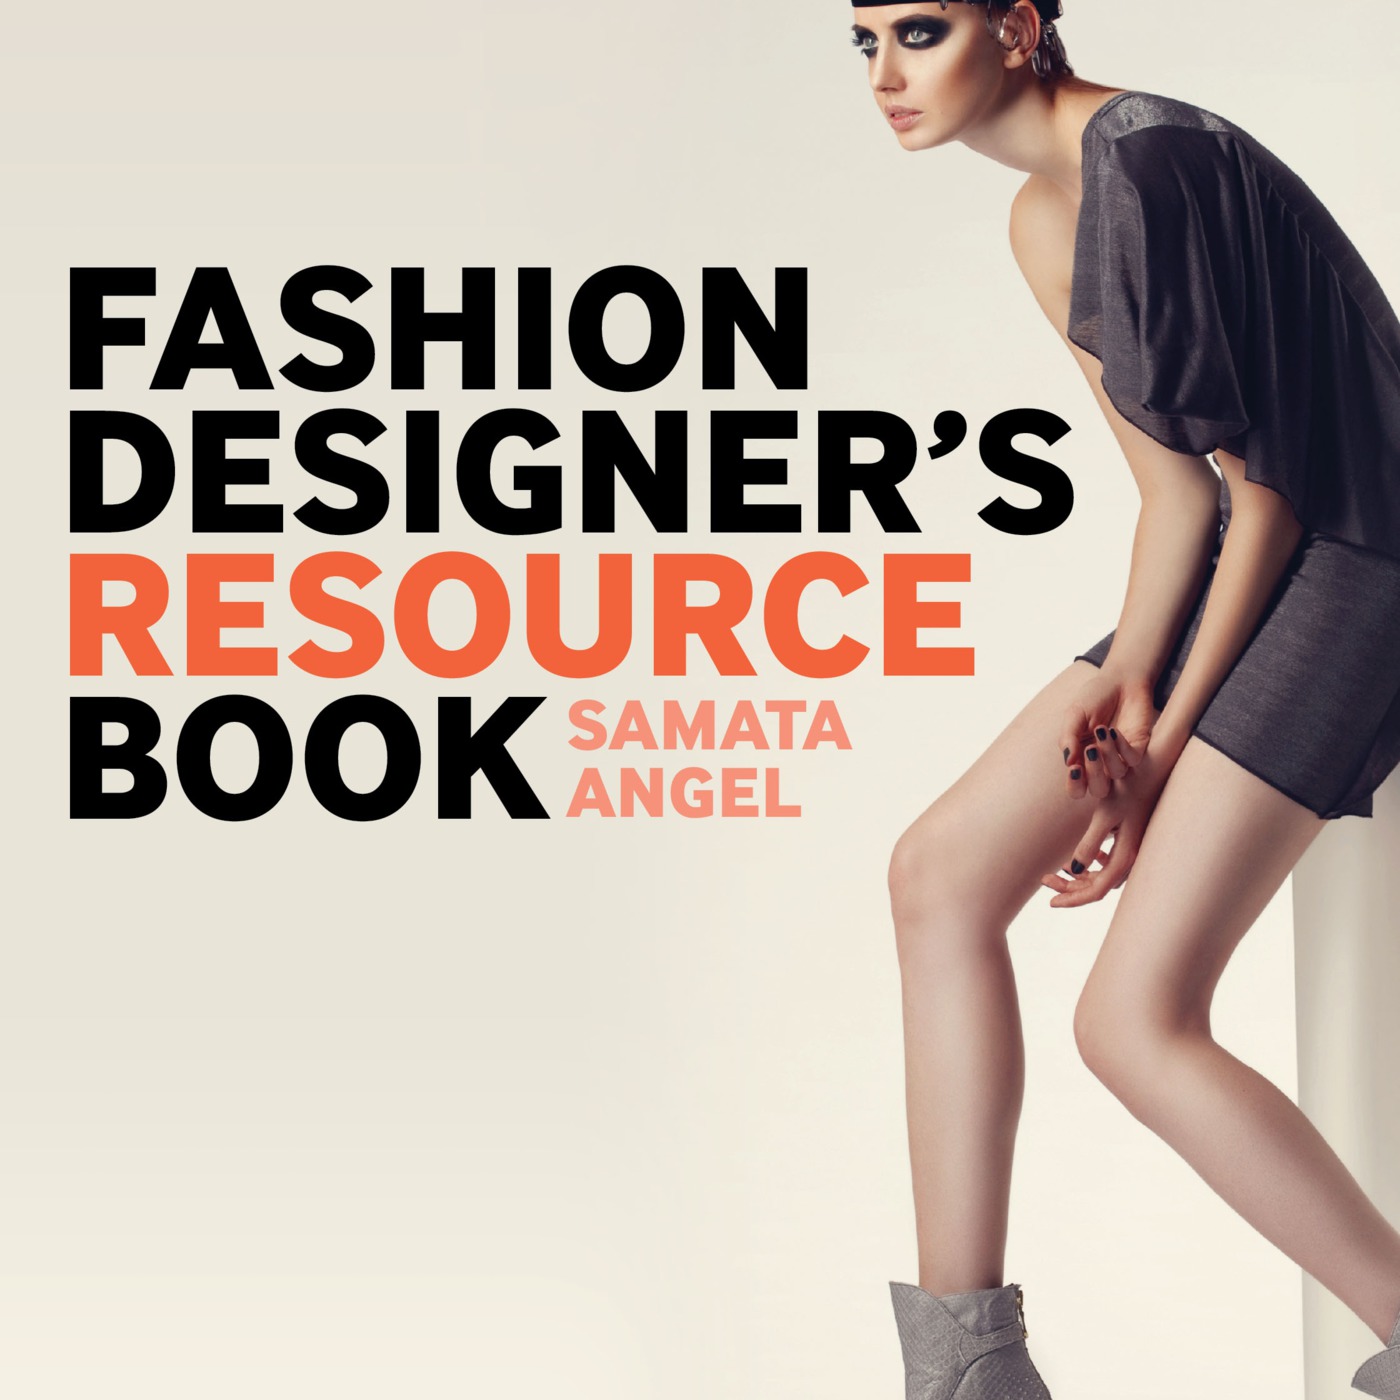 Introduction to the Fashion Designer's Resource Book by Samata Angel